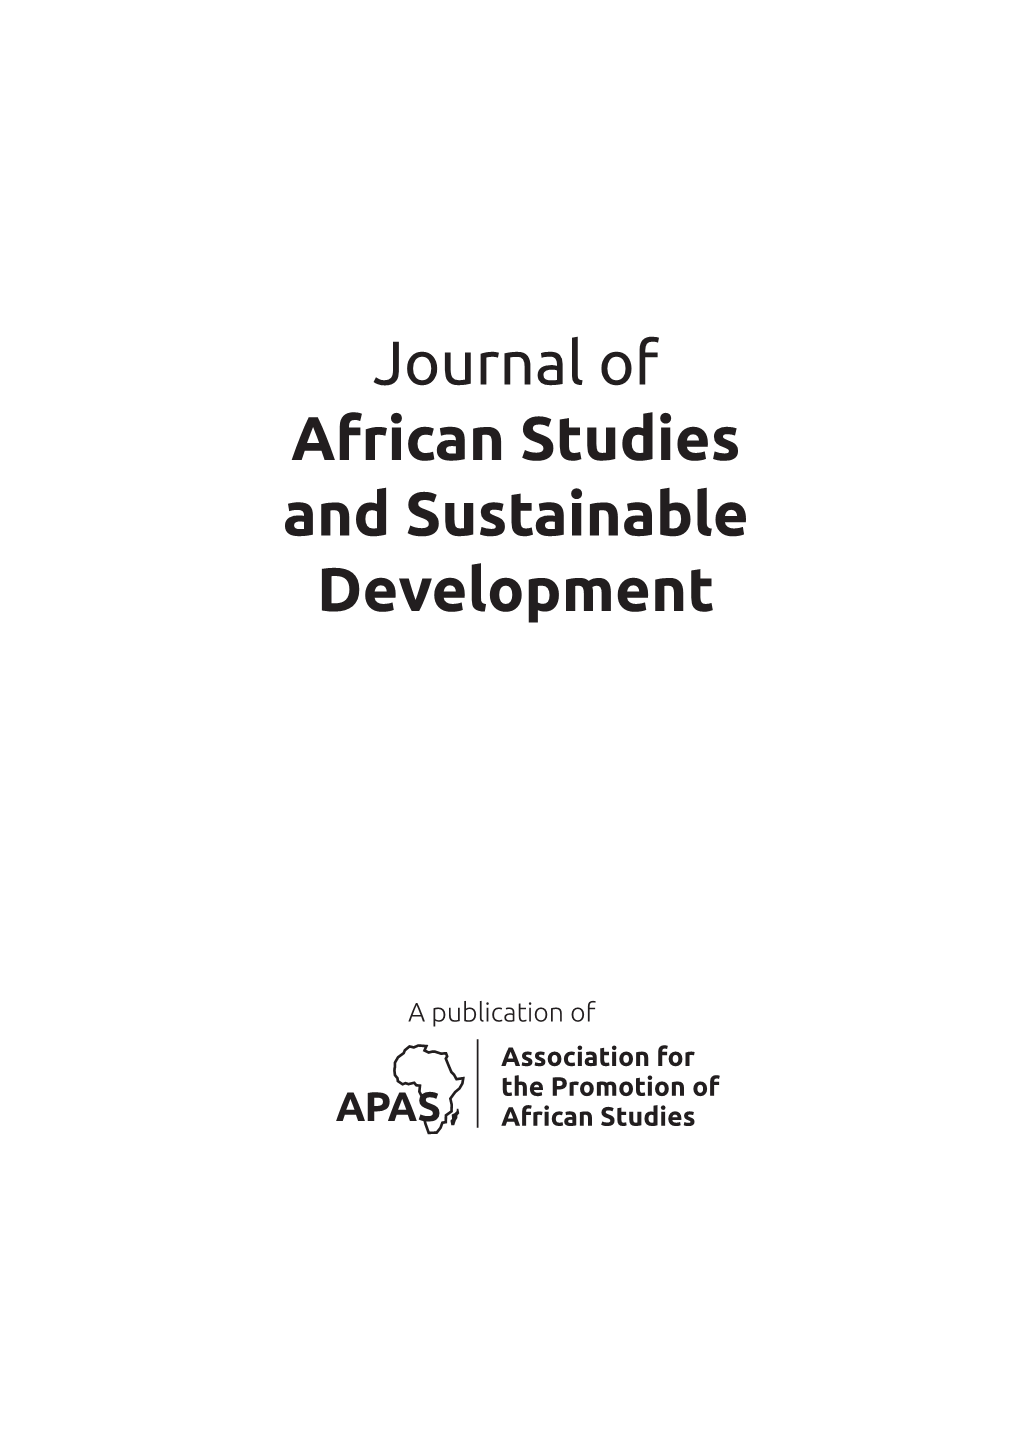 Journal of African Studies and Sustainable Development